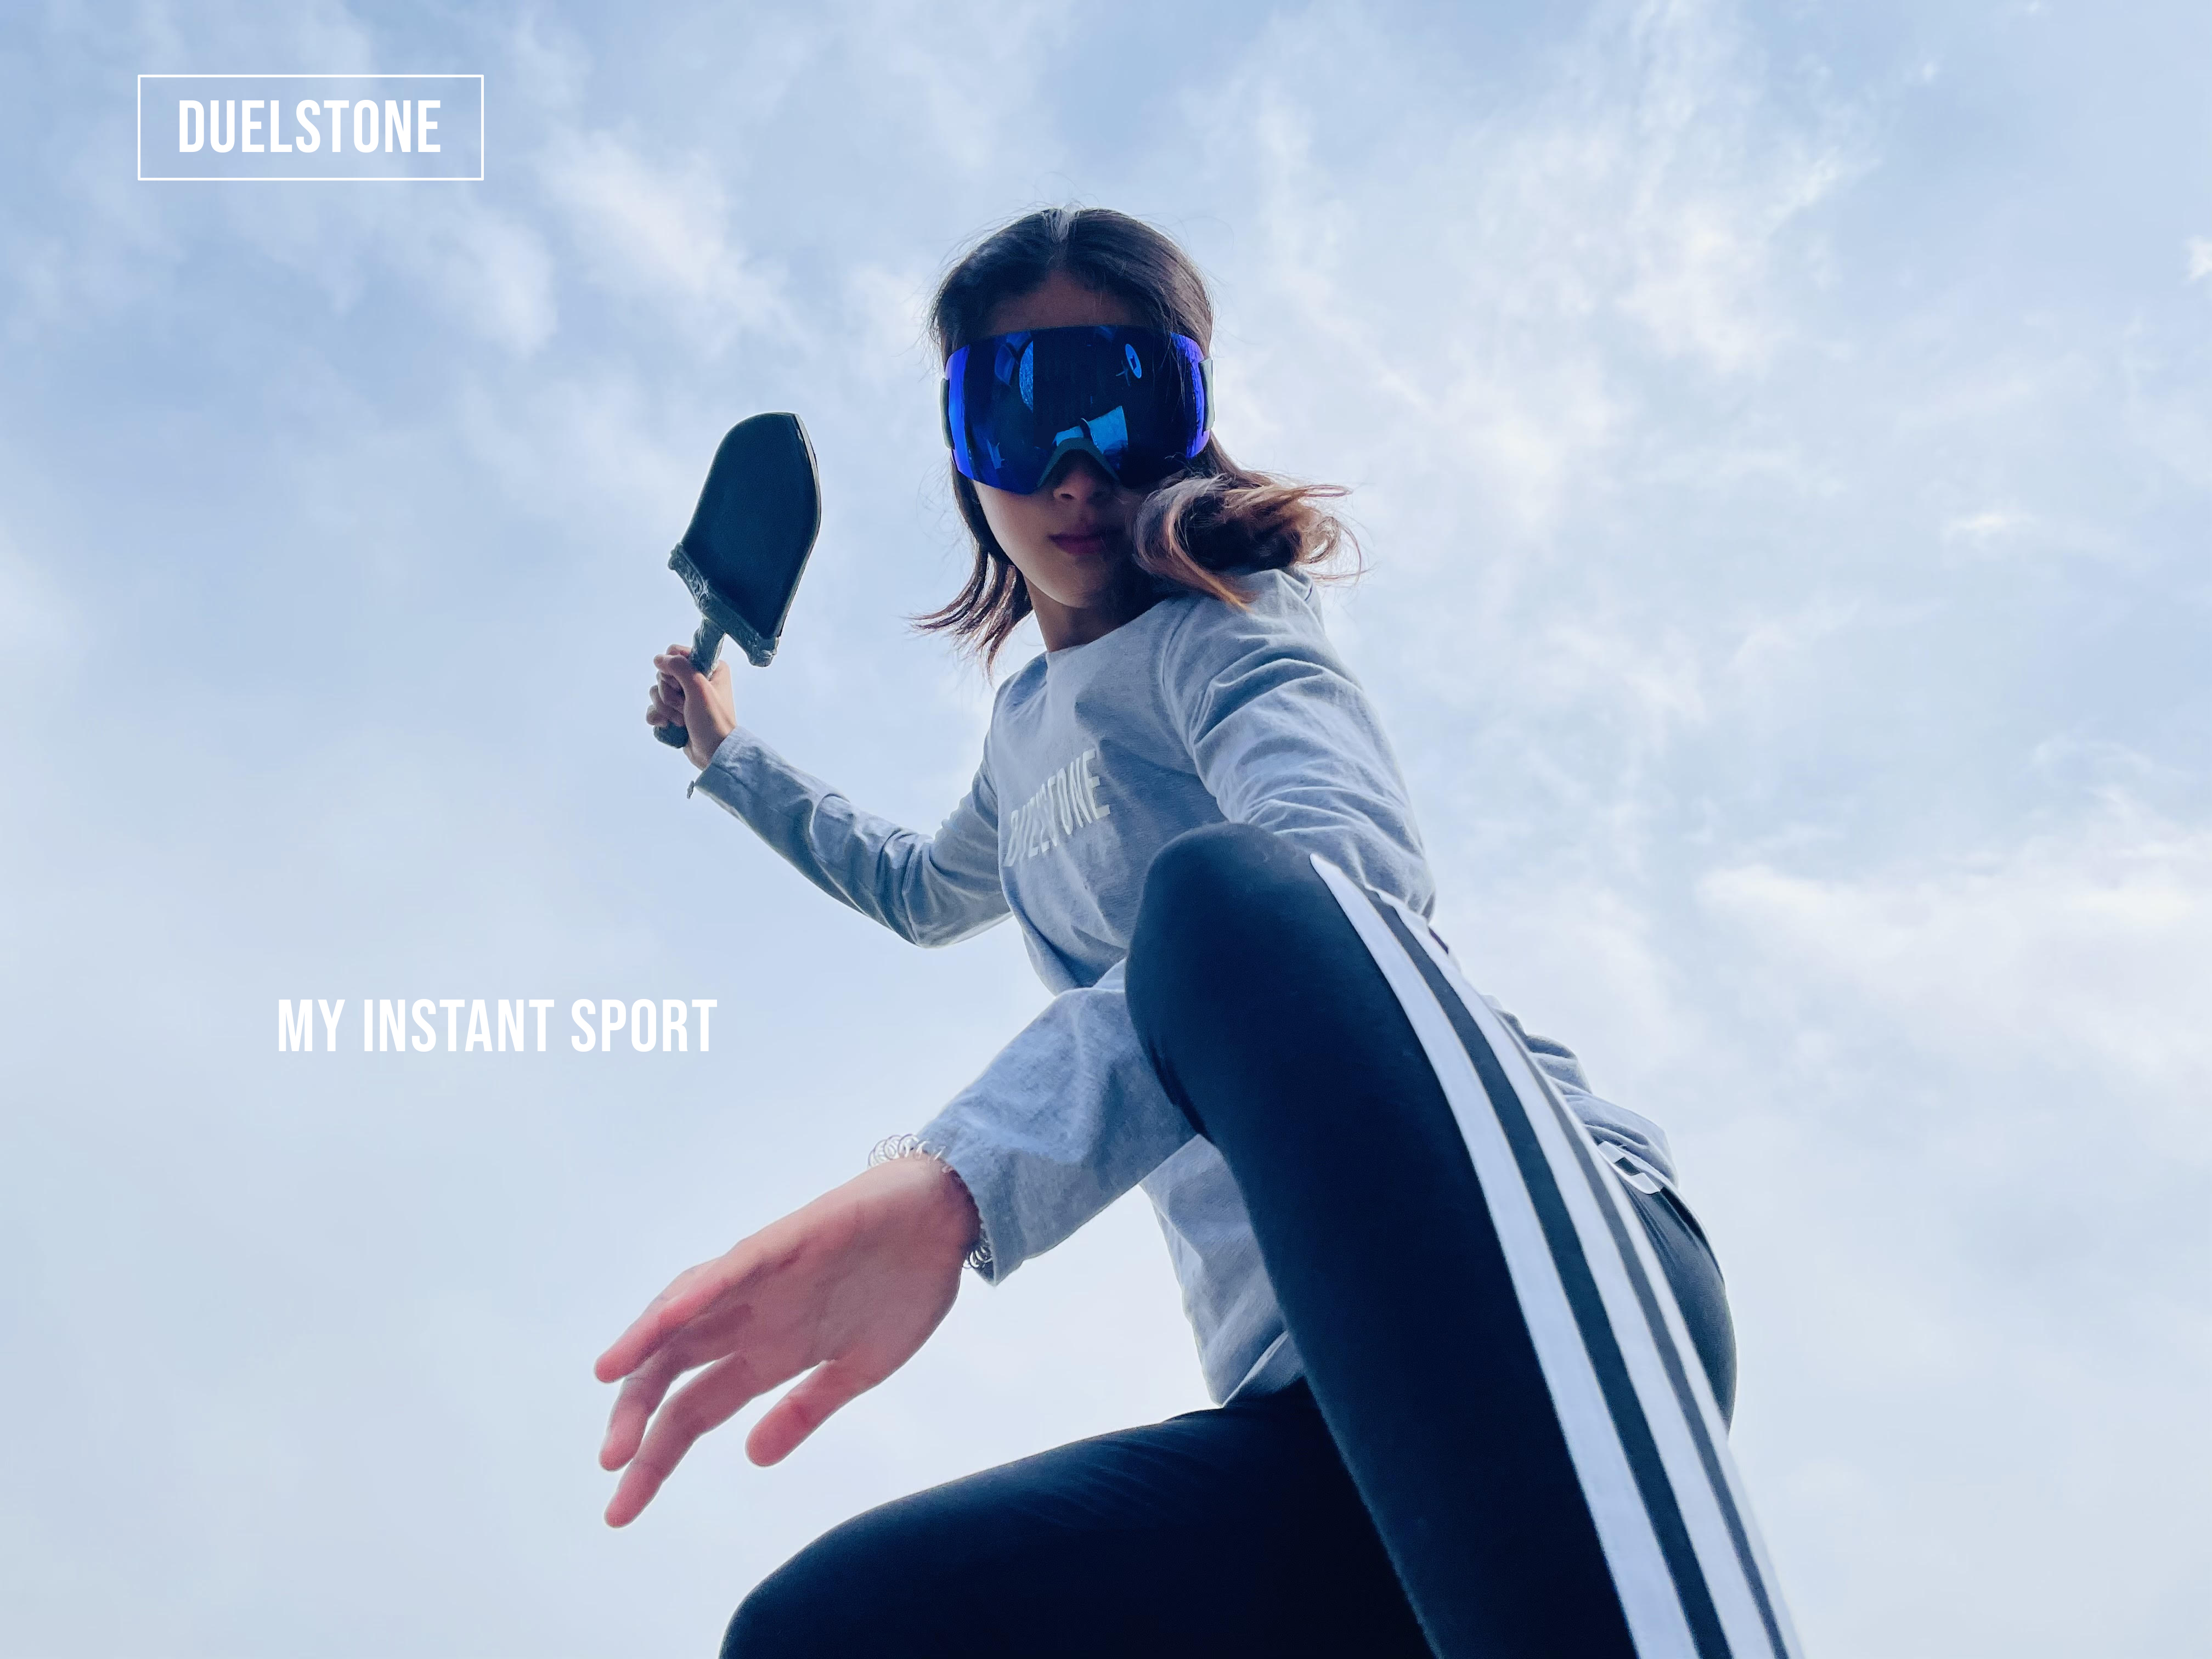  Cambridge designed Duelstone raises funds to become the world's most popular instant sport. 